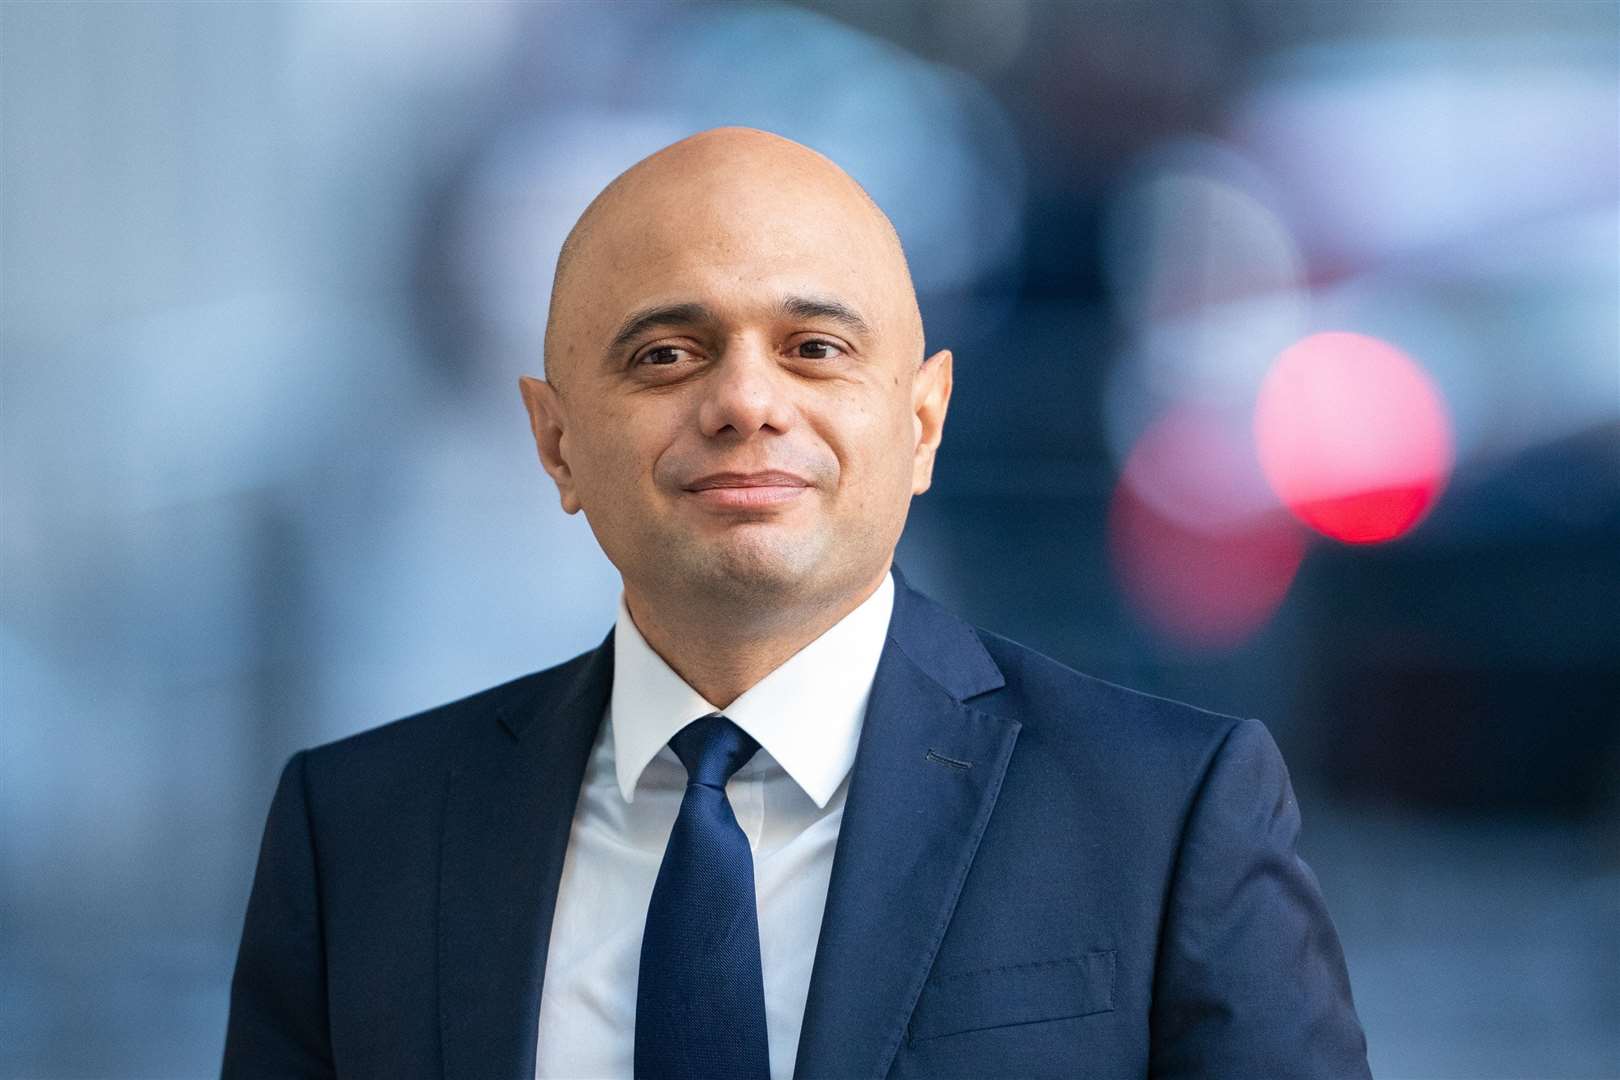 Health Secretary Sajid Javid says he believes students have been inspired by the efforts of medics during the pandemic